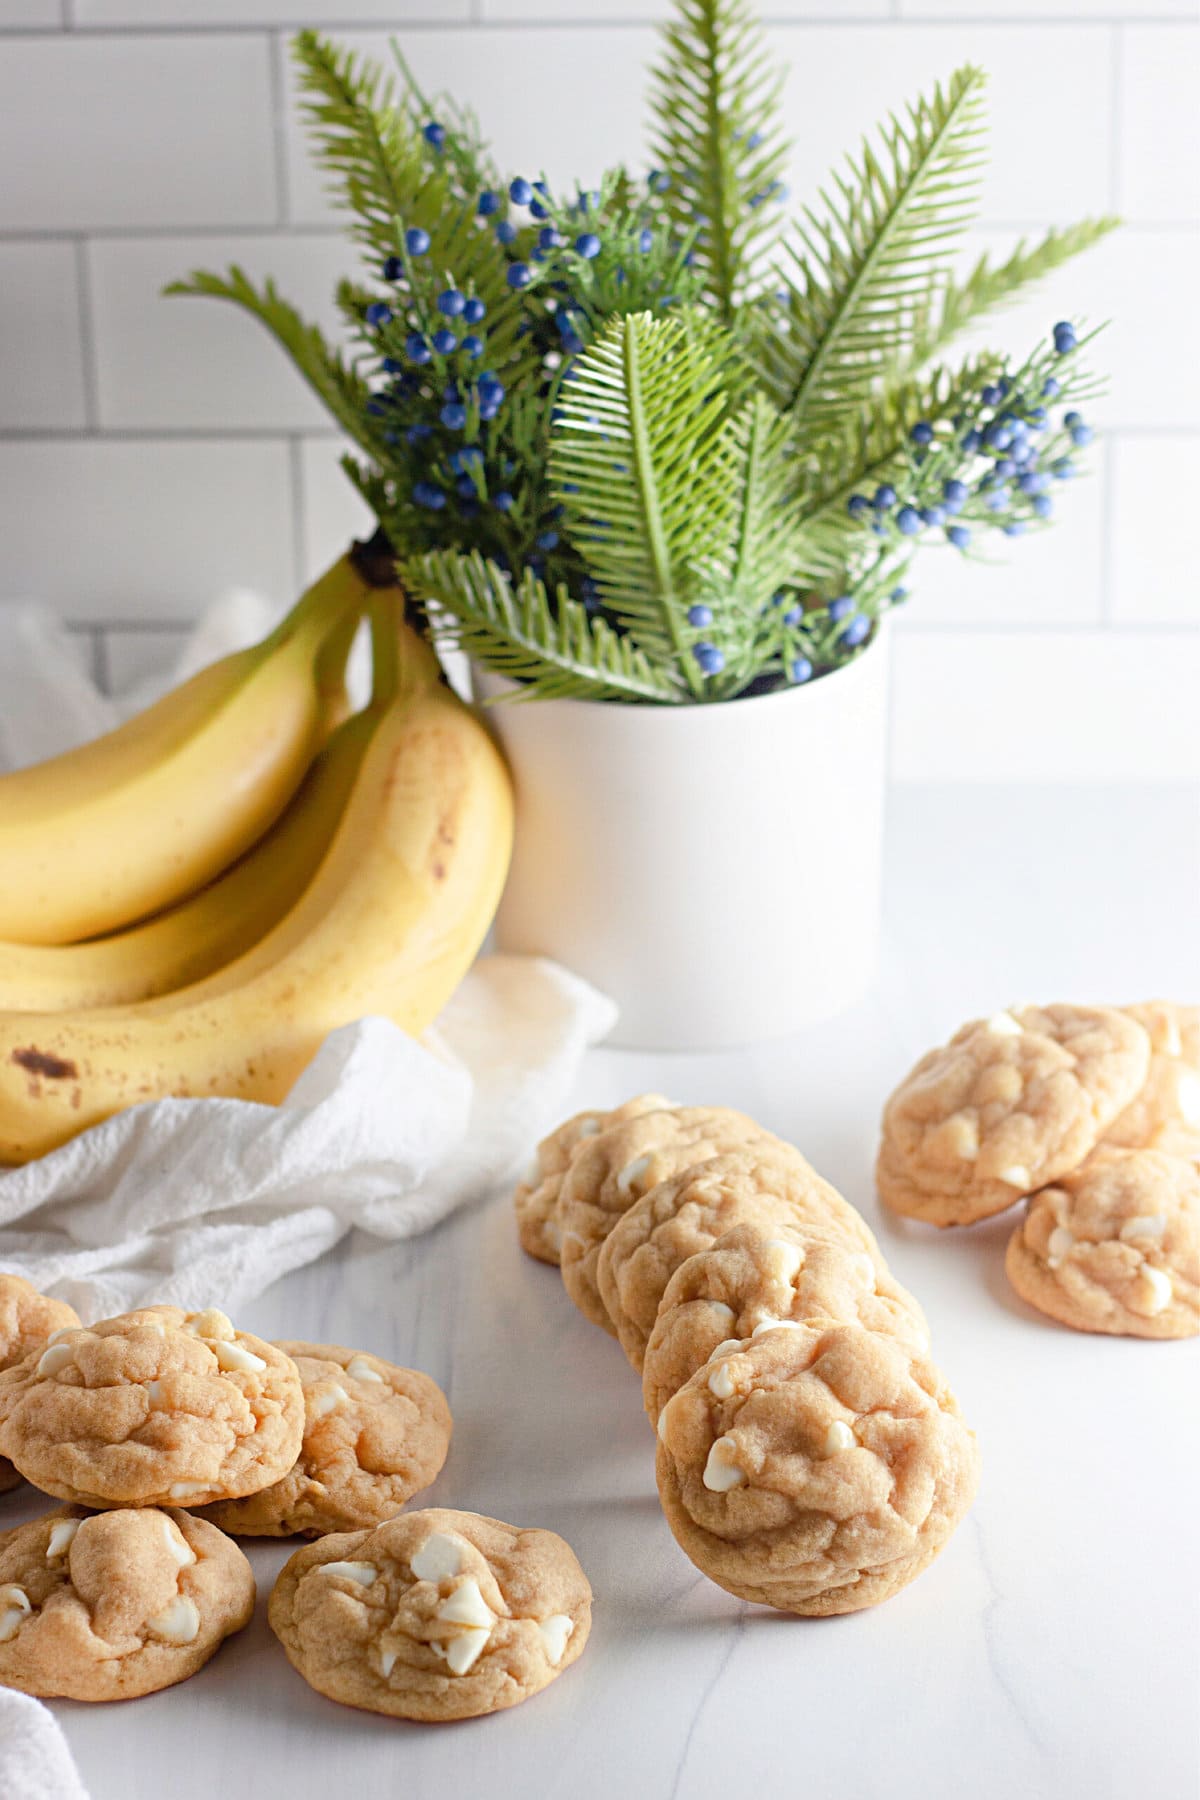 Banana cookies on the counter top in front of bananas and a plant